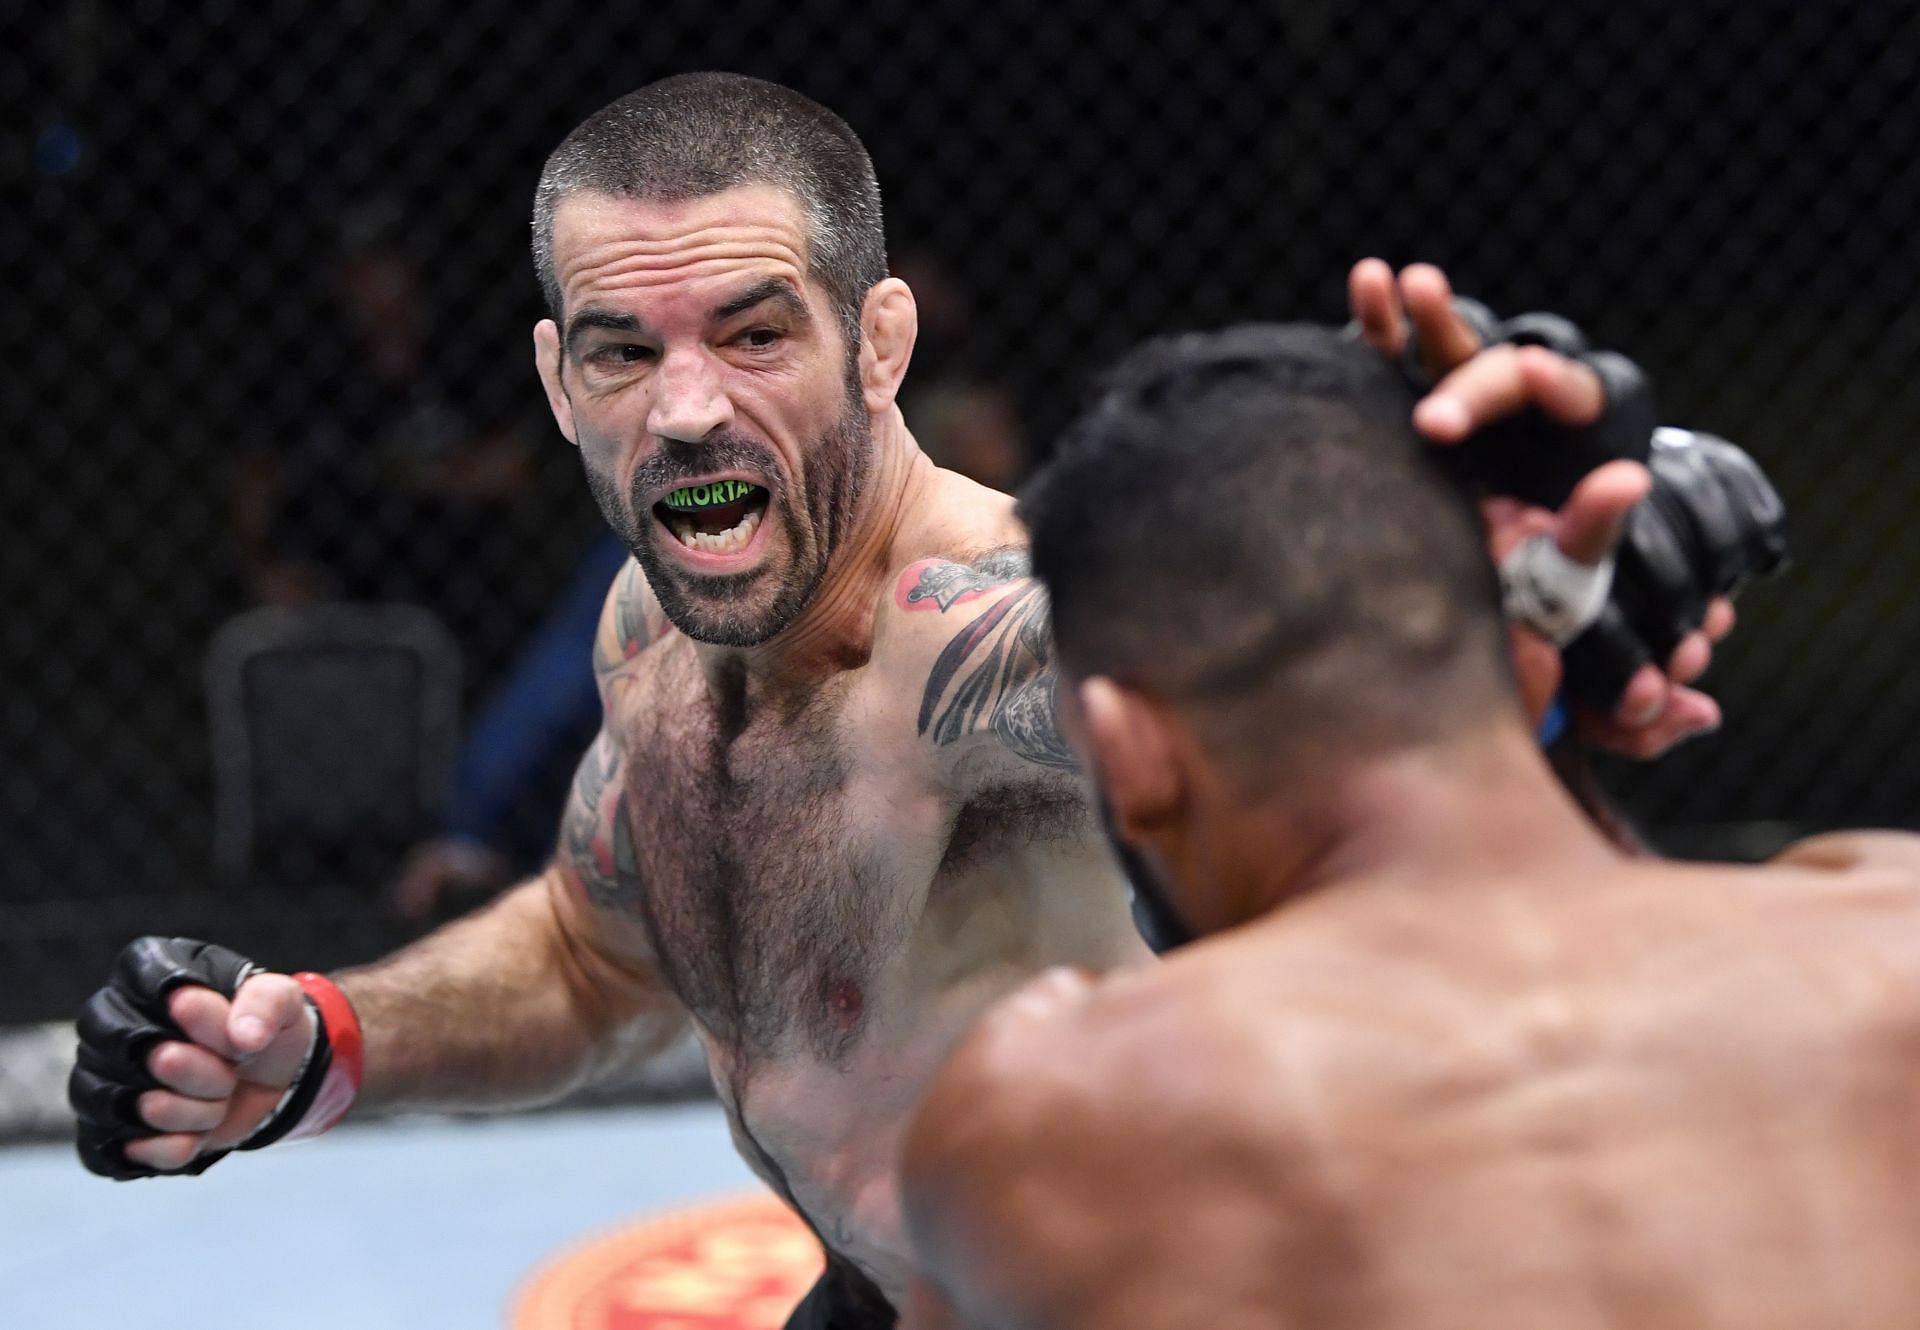 Matt Brown is arguably one of the most exciting fighters in UFC history